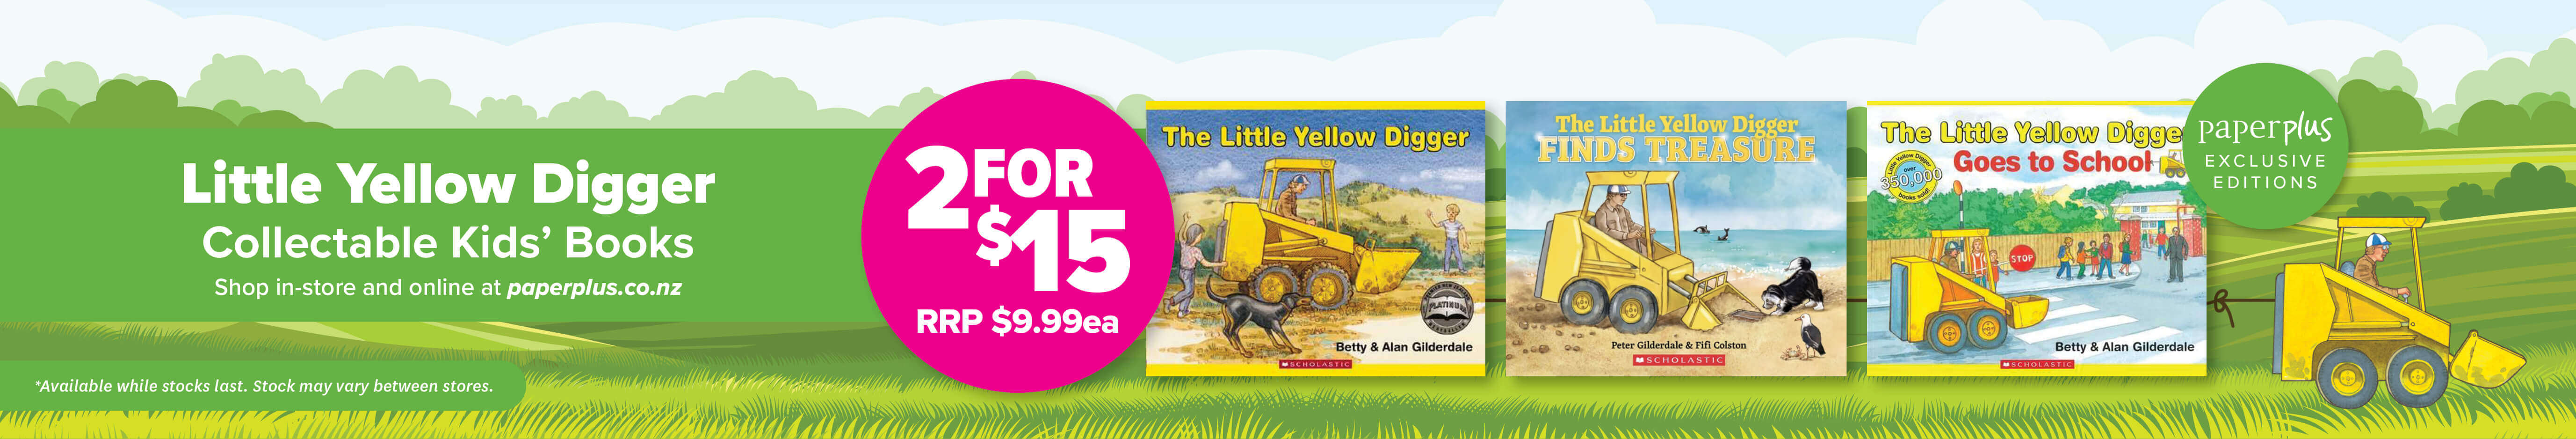 Little Yellow Digger Exclusive Book promotion 2 for $15